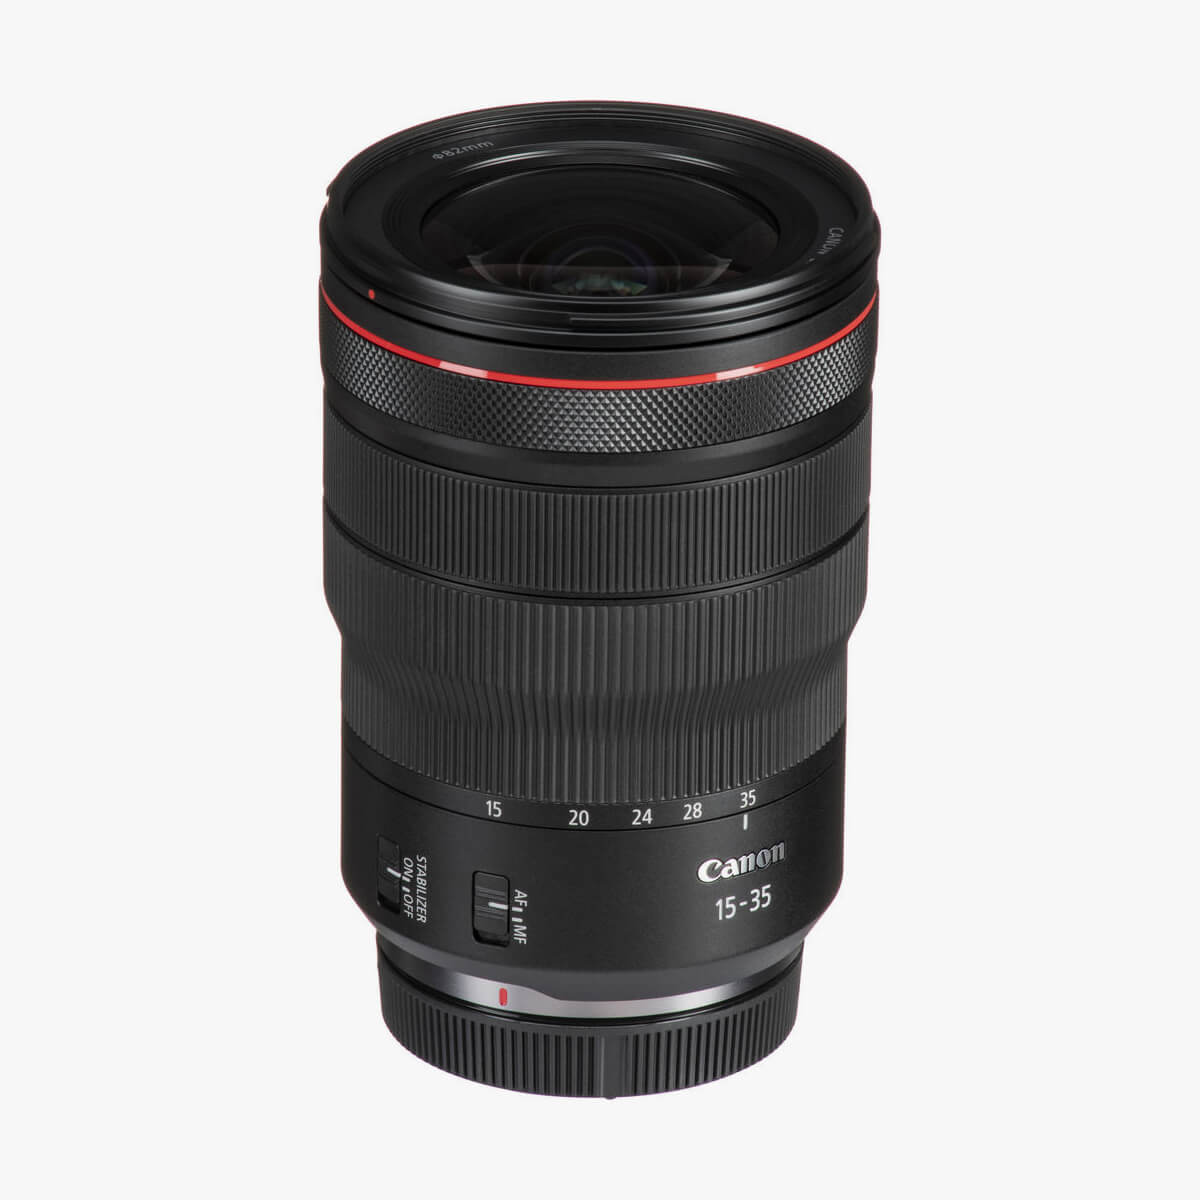 Canon RF 1535mm f/2.8 L IS USM Mirrorless Zoom Lens